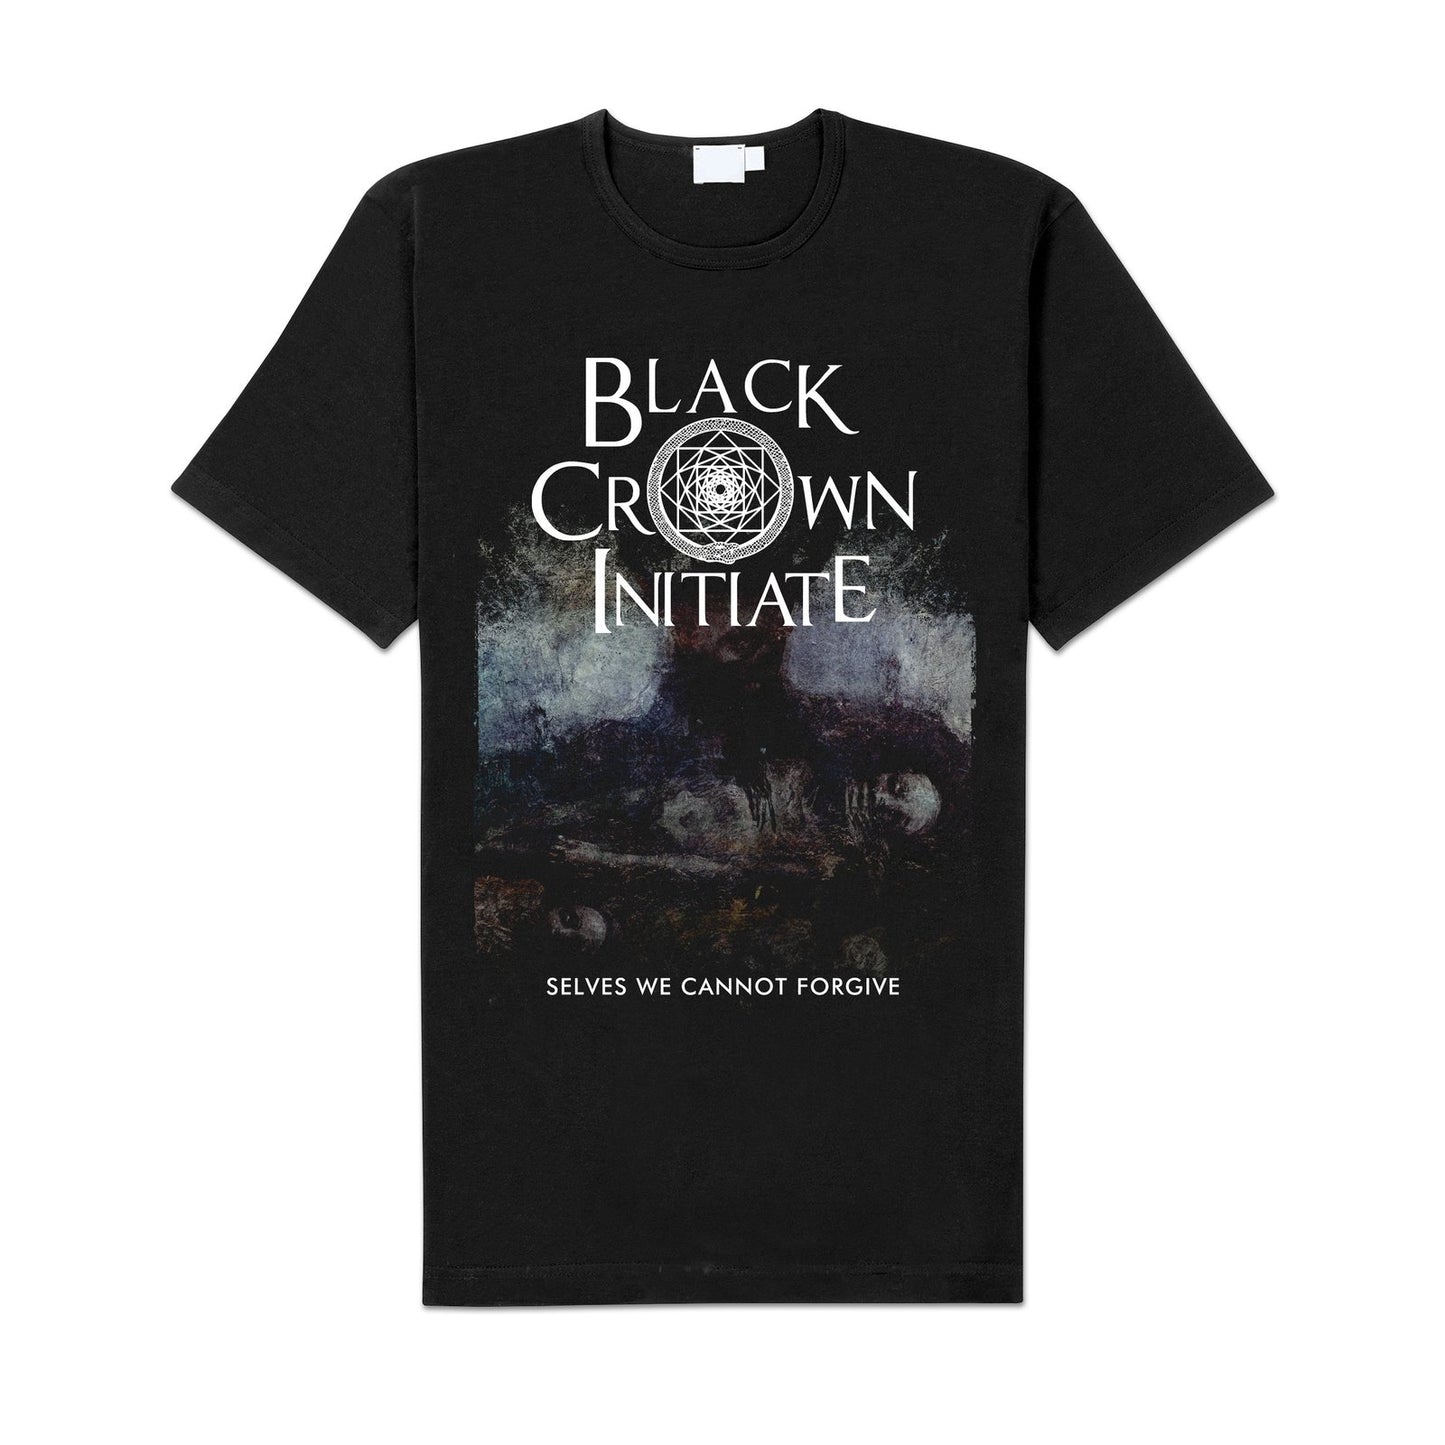 Black Crown Initiate "Selves We Cannot Forgive" Shirt